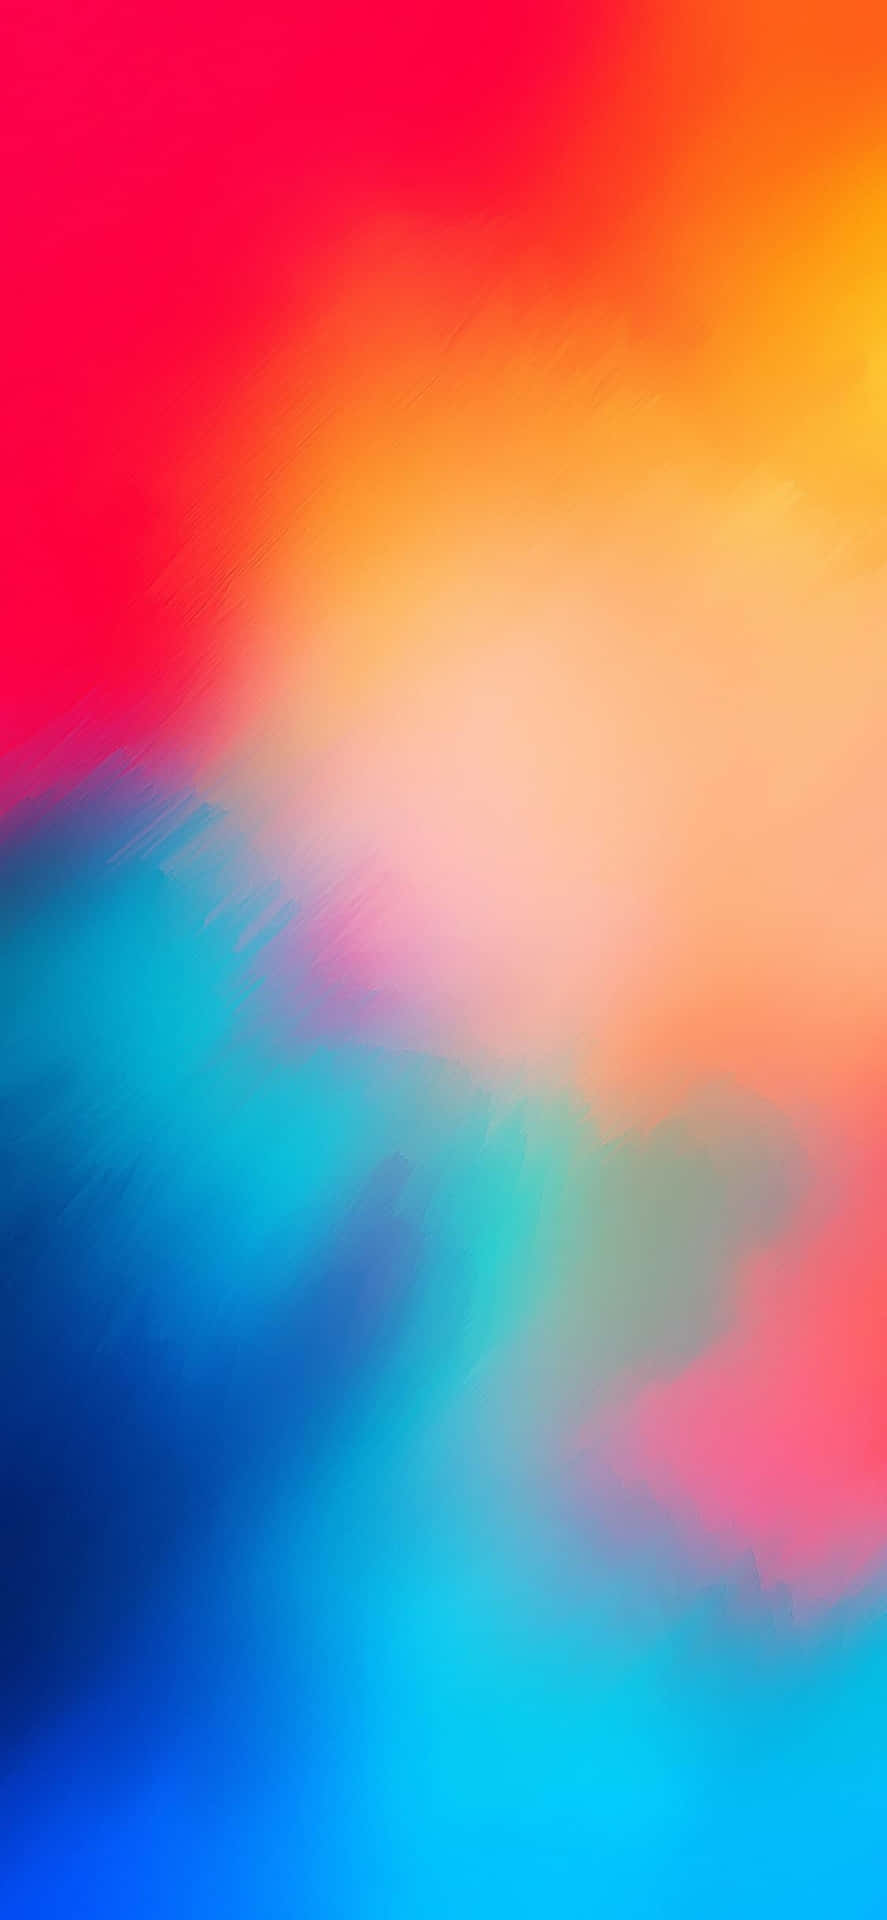 Try something new with this vibrant multicolor background